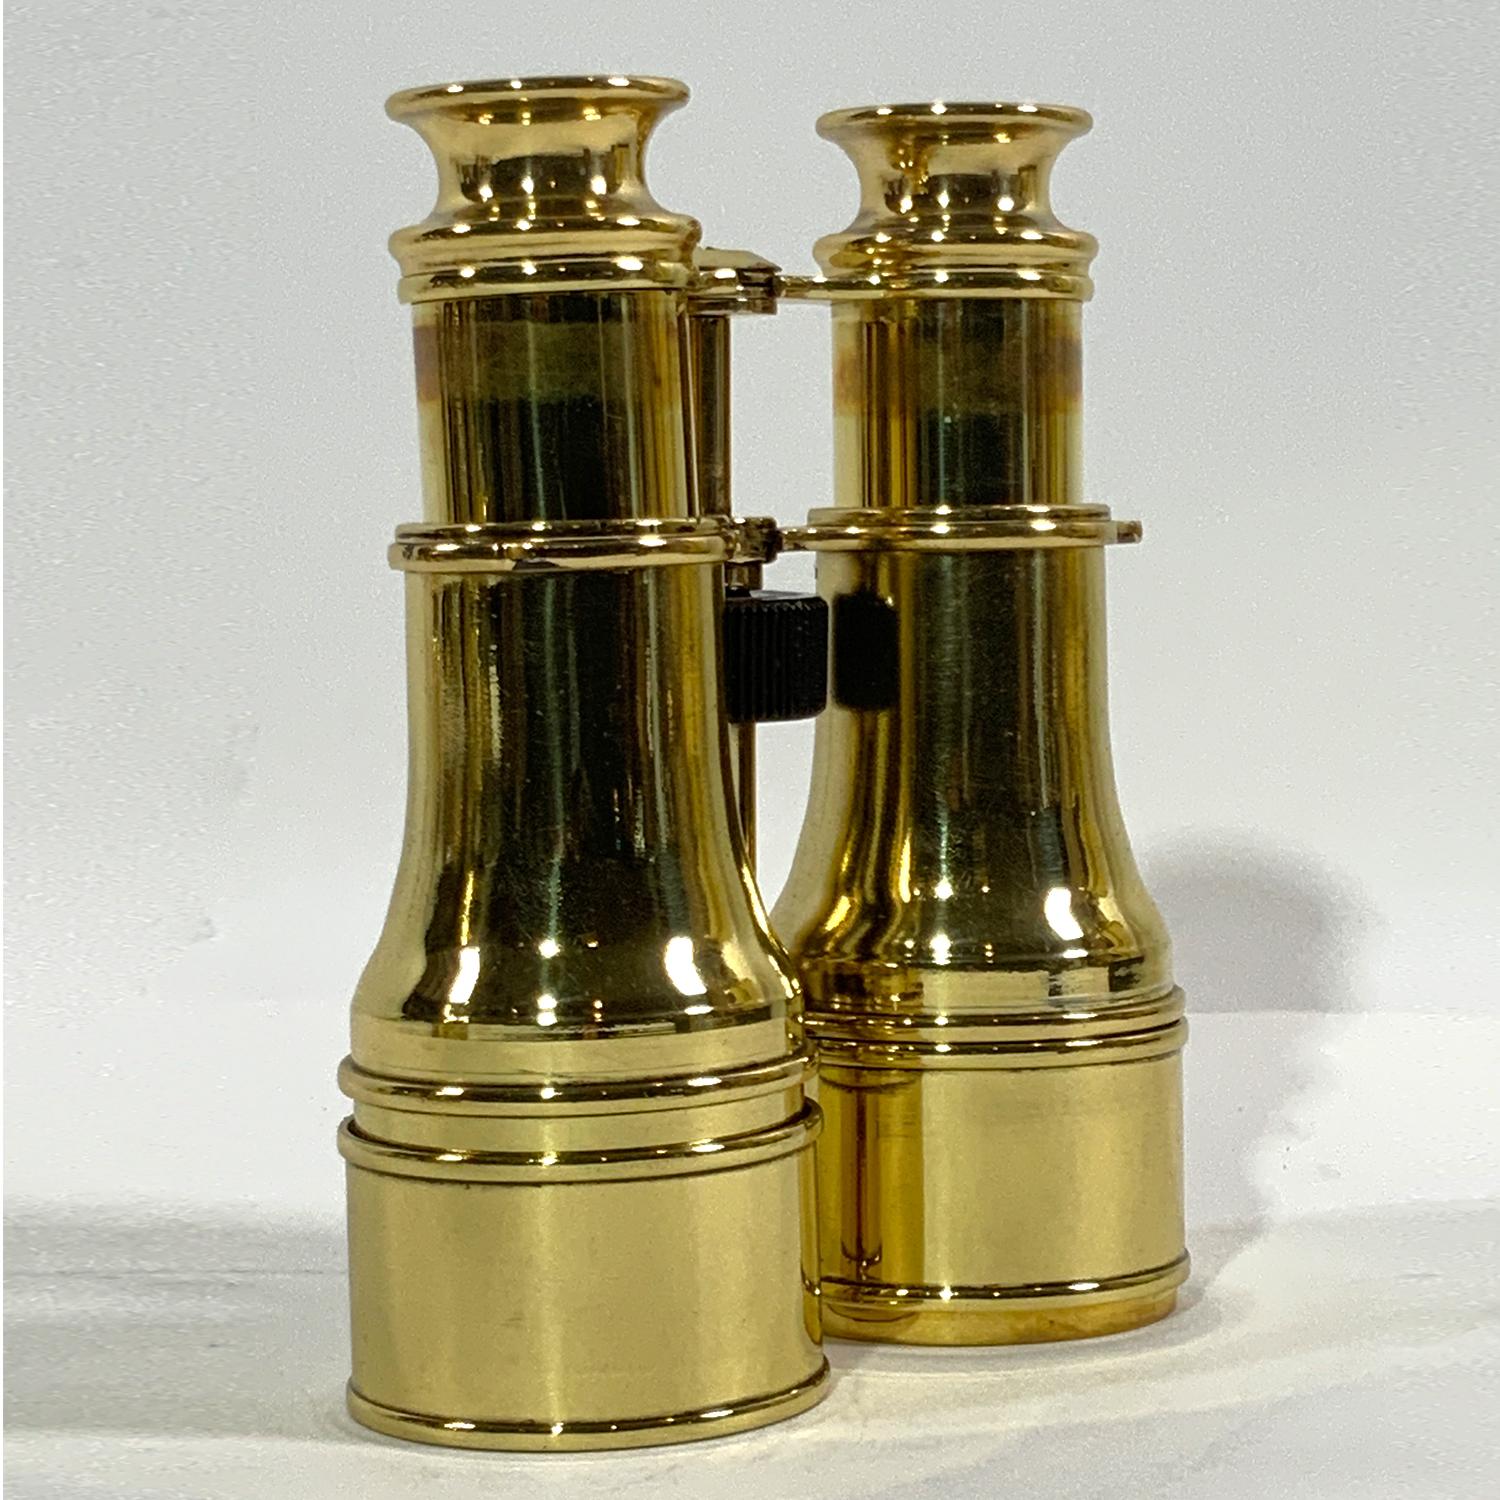 Exceptional pair of polished and lacquered English Marine binoculars. Rare amber filtered lenses. Geared focal knob. Clear crisp optics. Circa 1930.